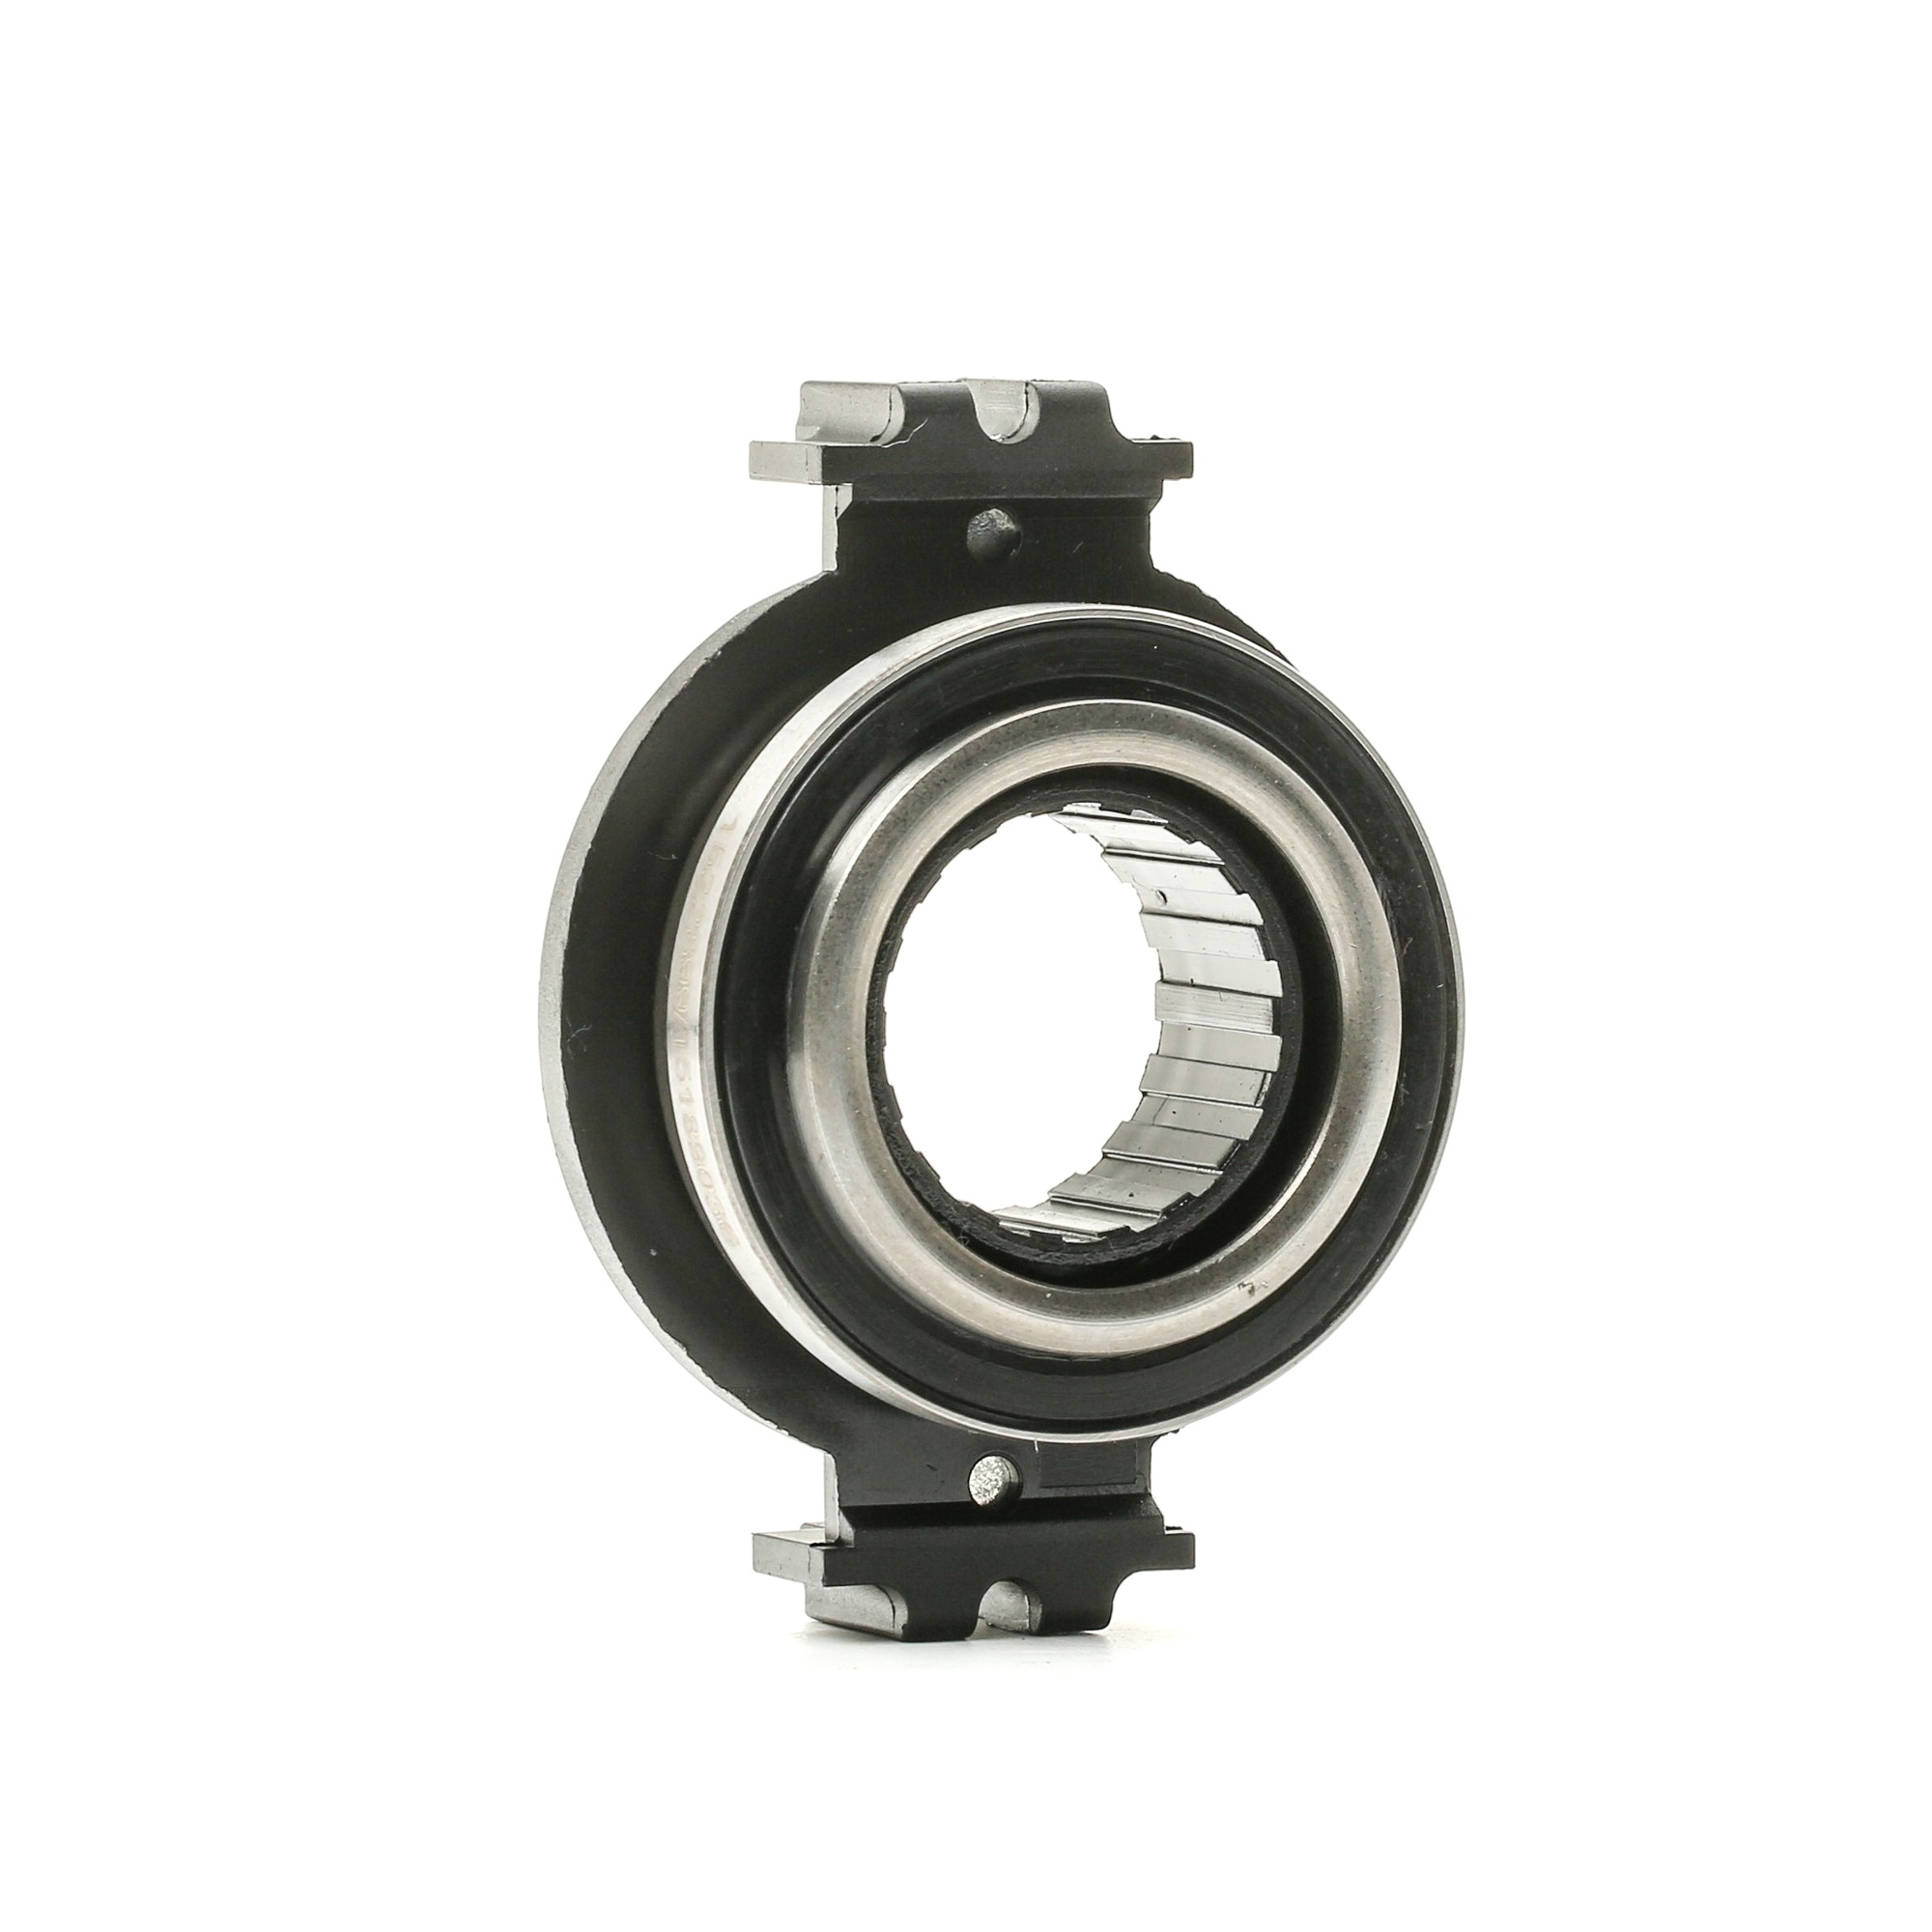 Image of RIDEX Clutch Release Bearing FIAT,PEUGEOT,CITROËN 48R0020 1611267980,204150,204164 Clutch Bearing,Release Bearing,Releaser 9614677380,9635856280